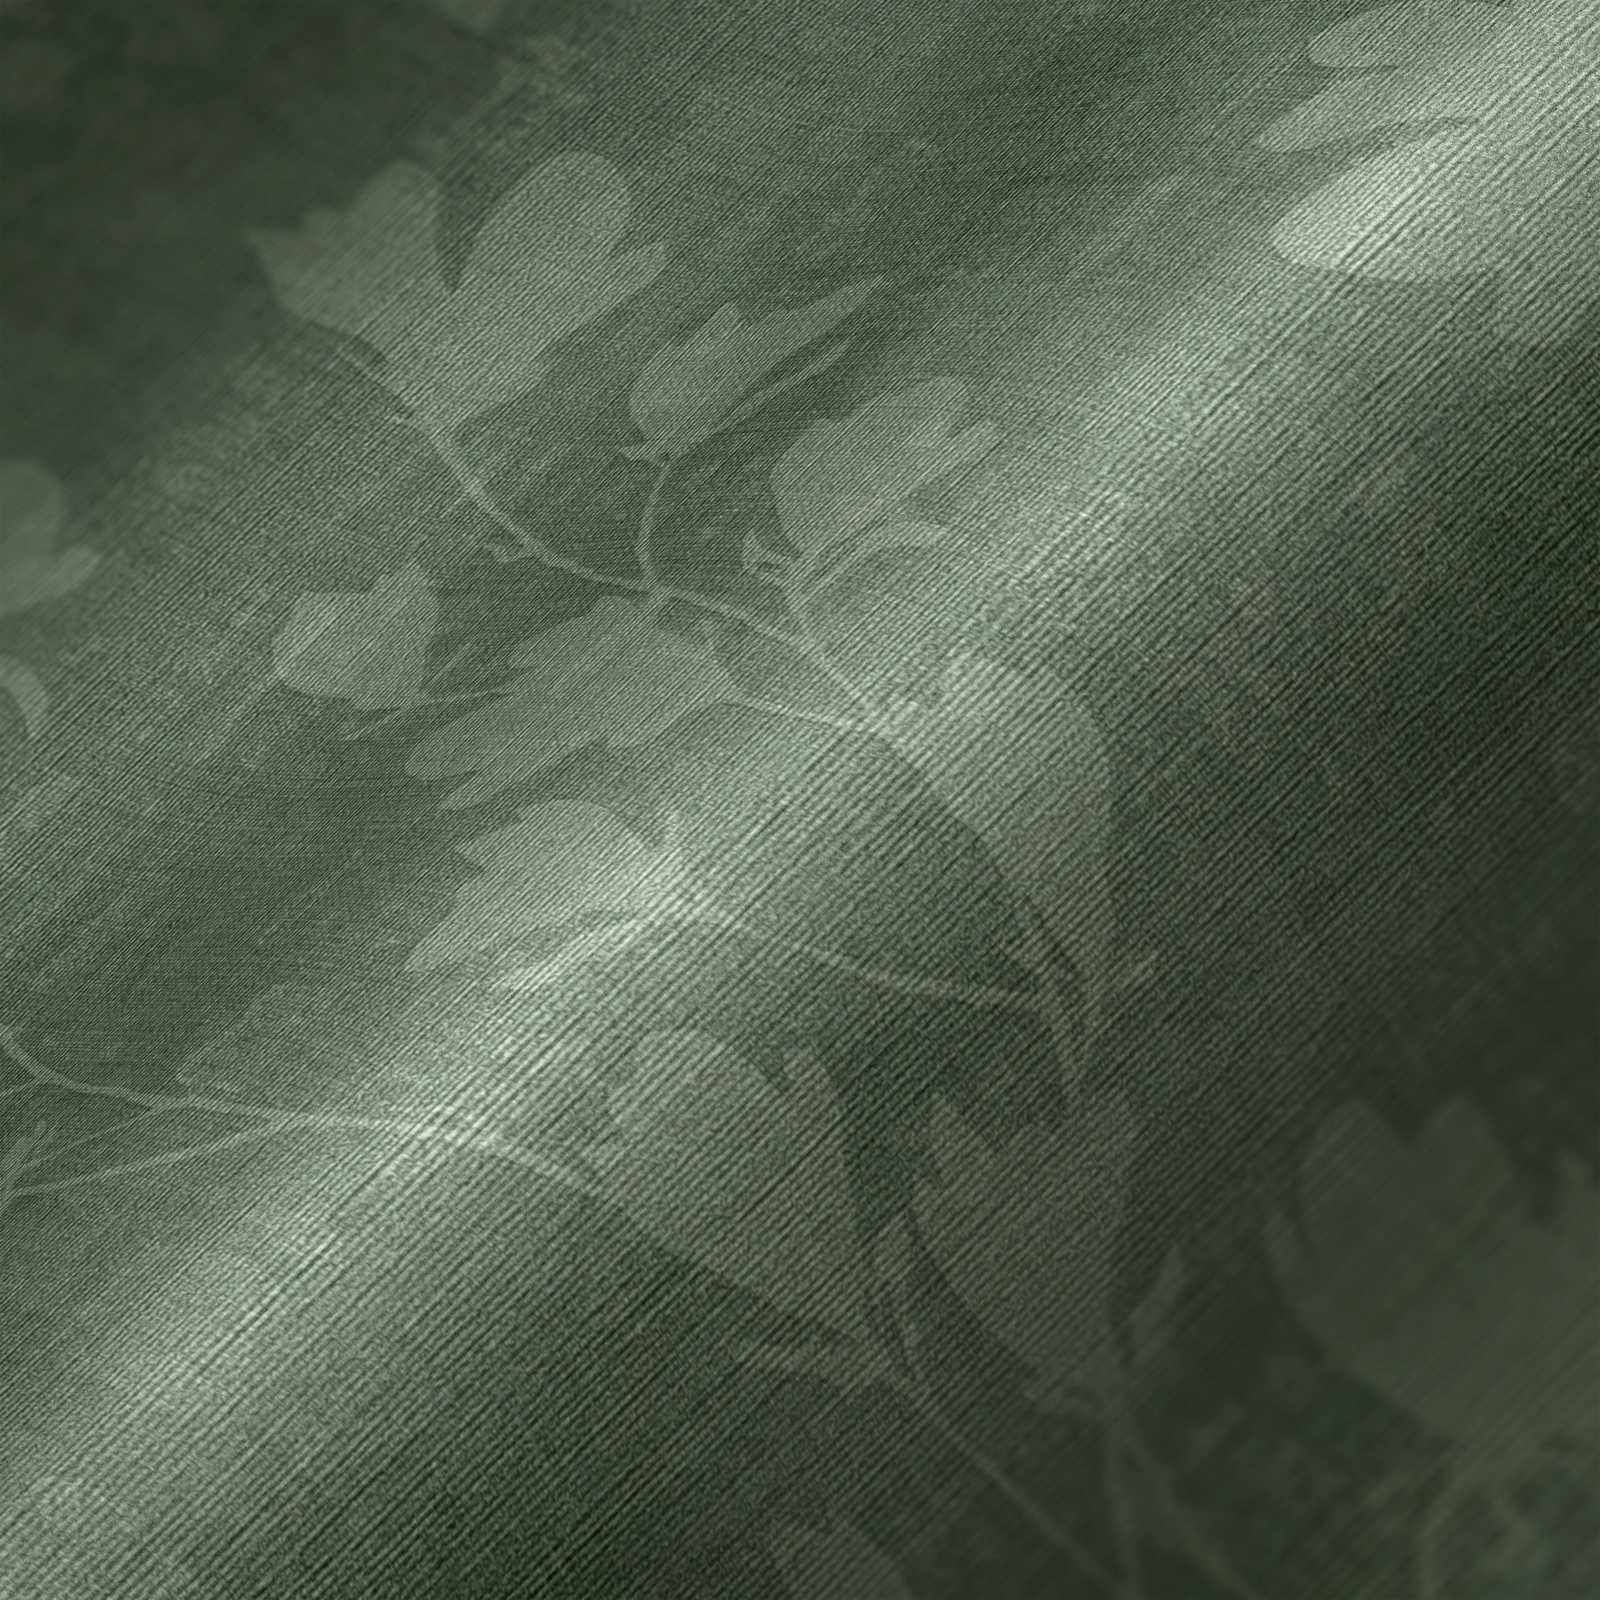             Nature wallpaper with leaf motif - green
        